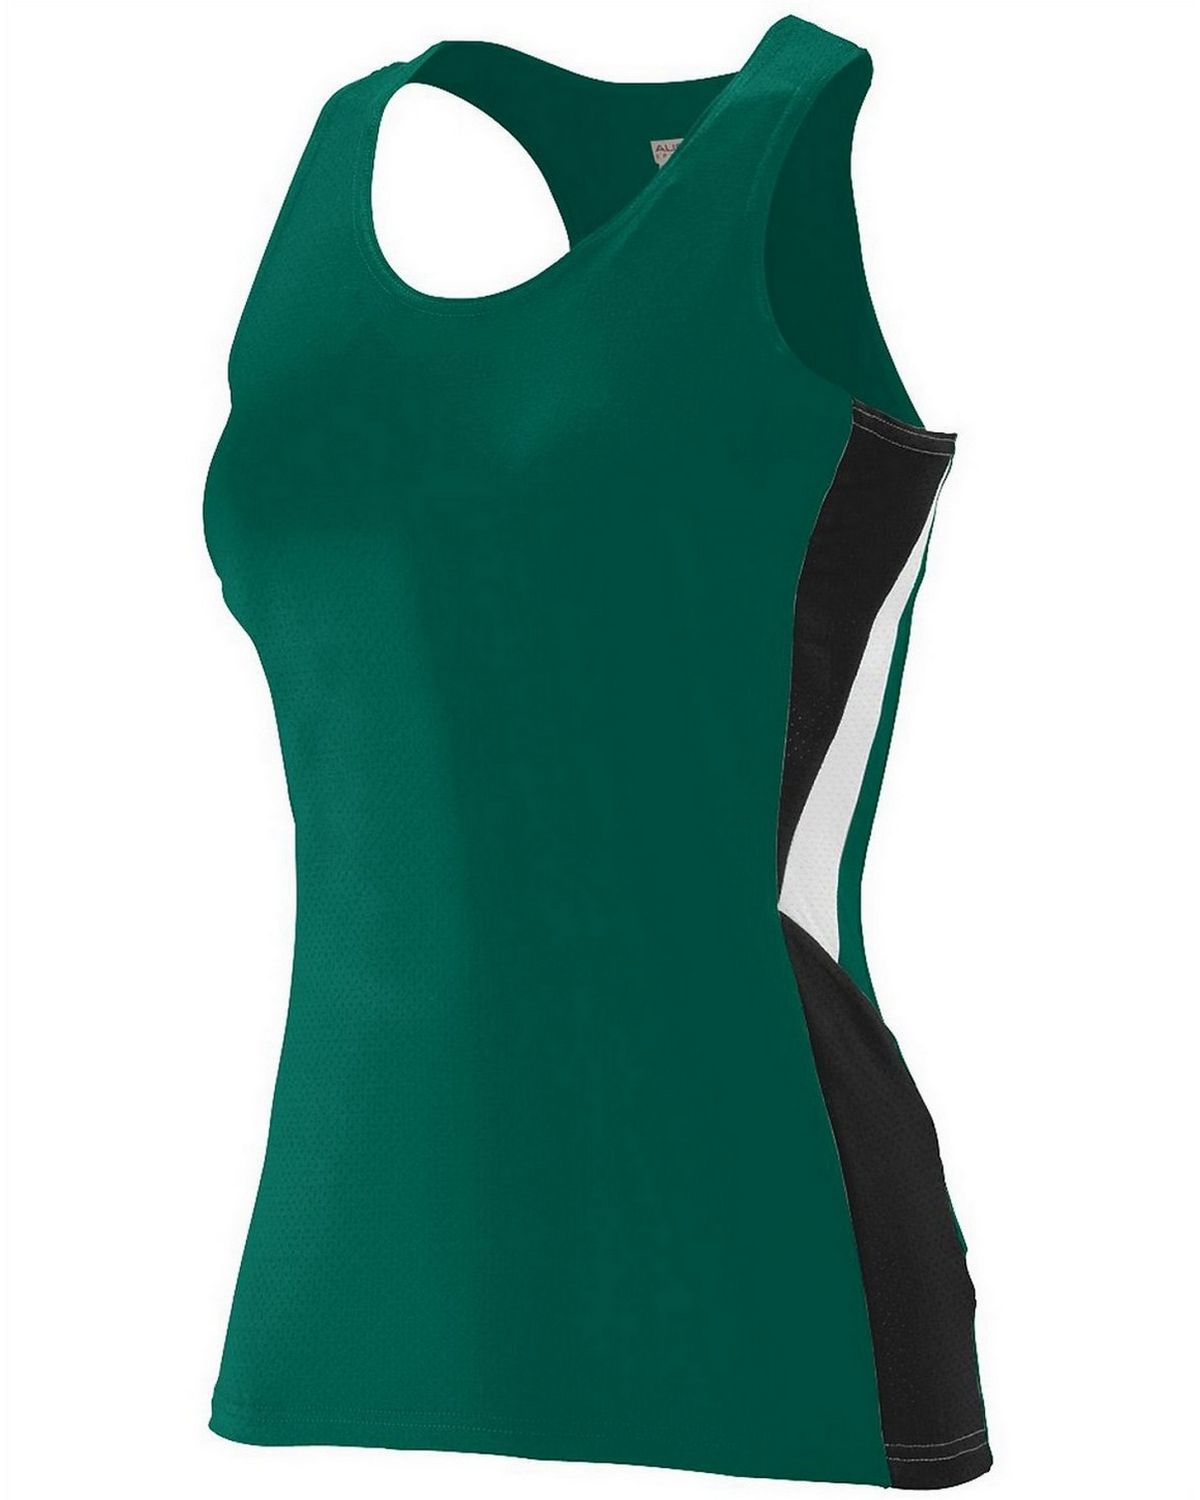 Selected Color is Dk Green/Blk/Wht